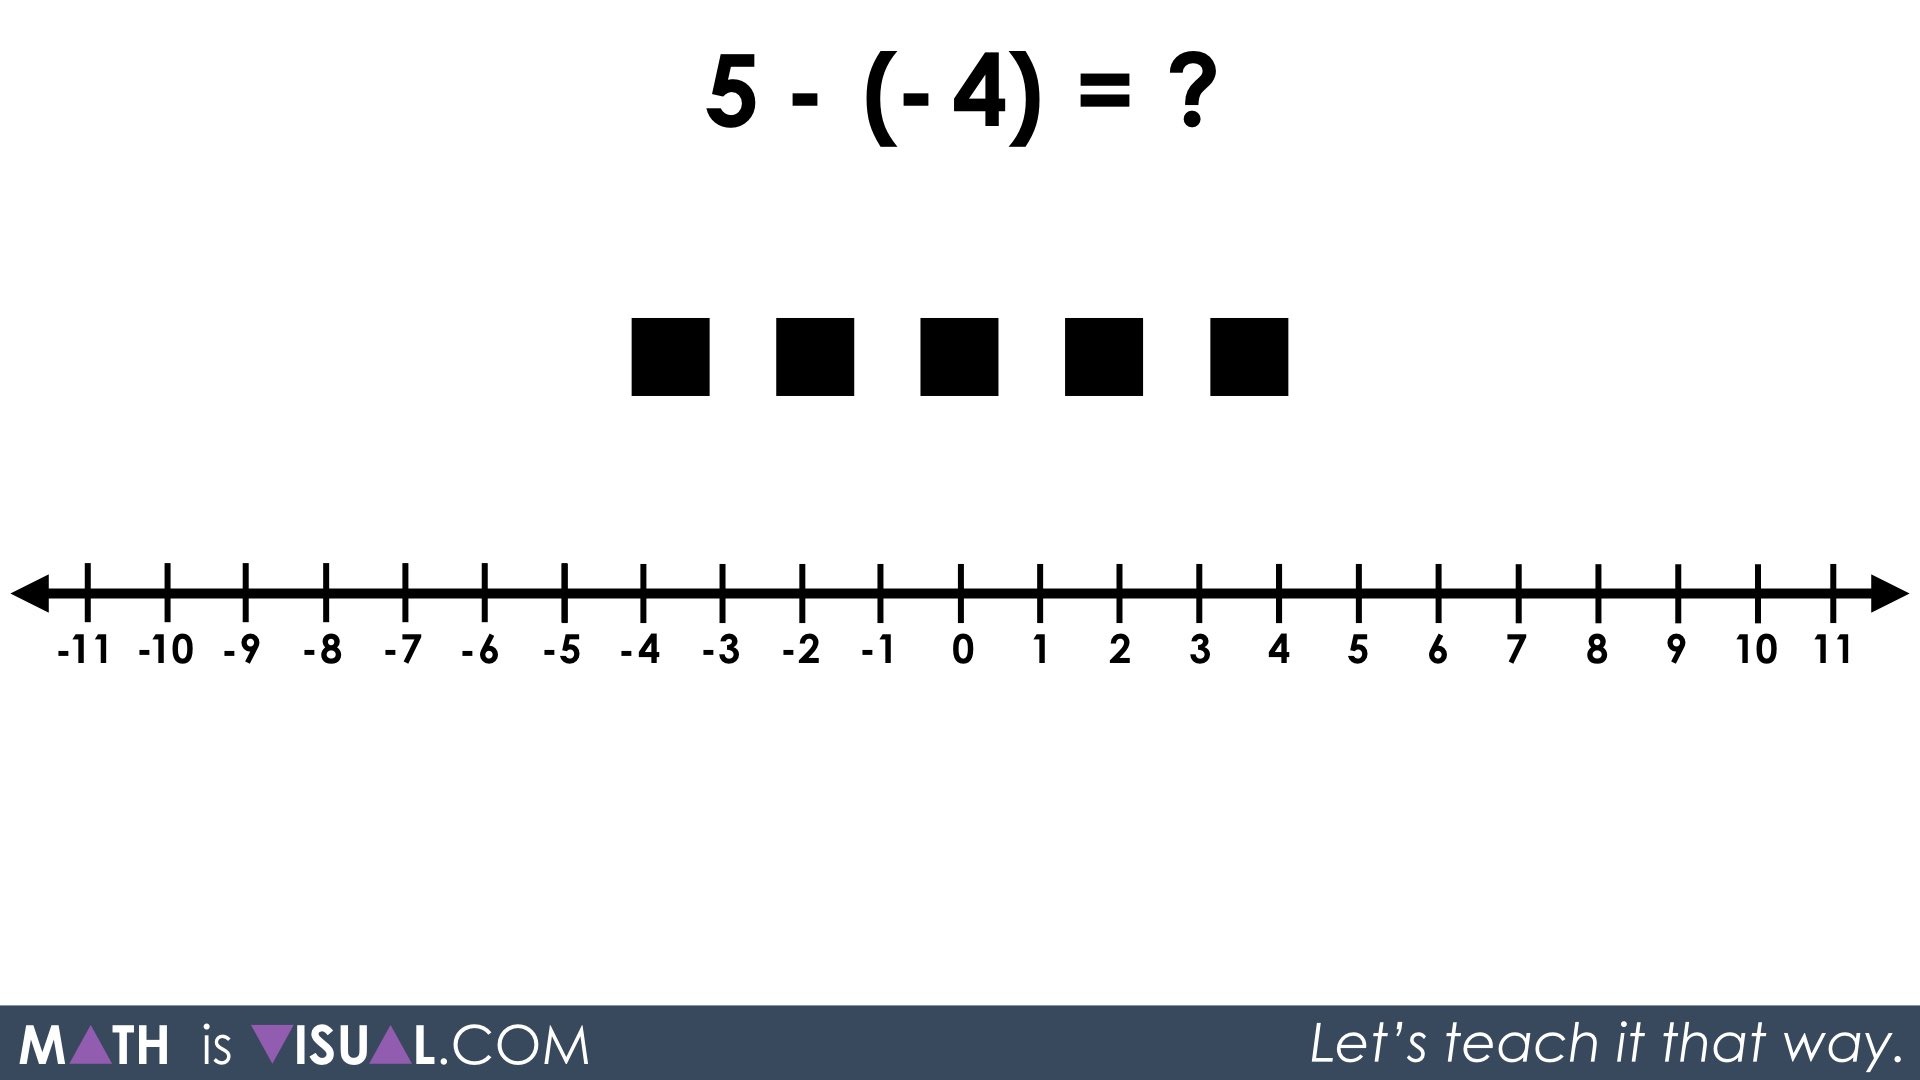 integer-subtraction-using-a-number-line-and-symbolic-notation-04-q3-5-minus-neg4-math-is-visual